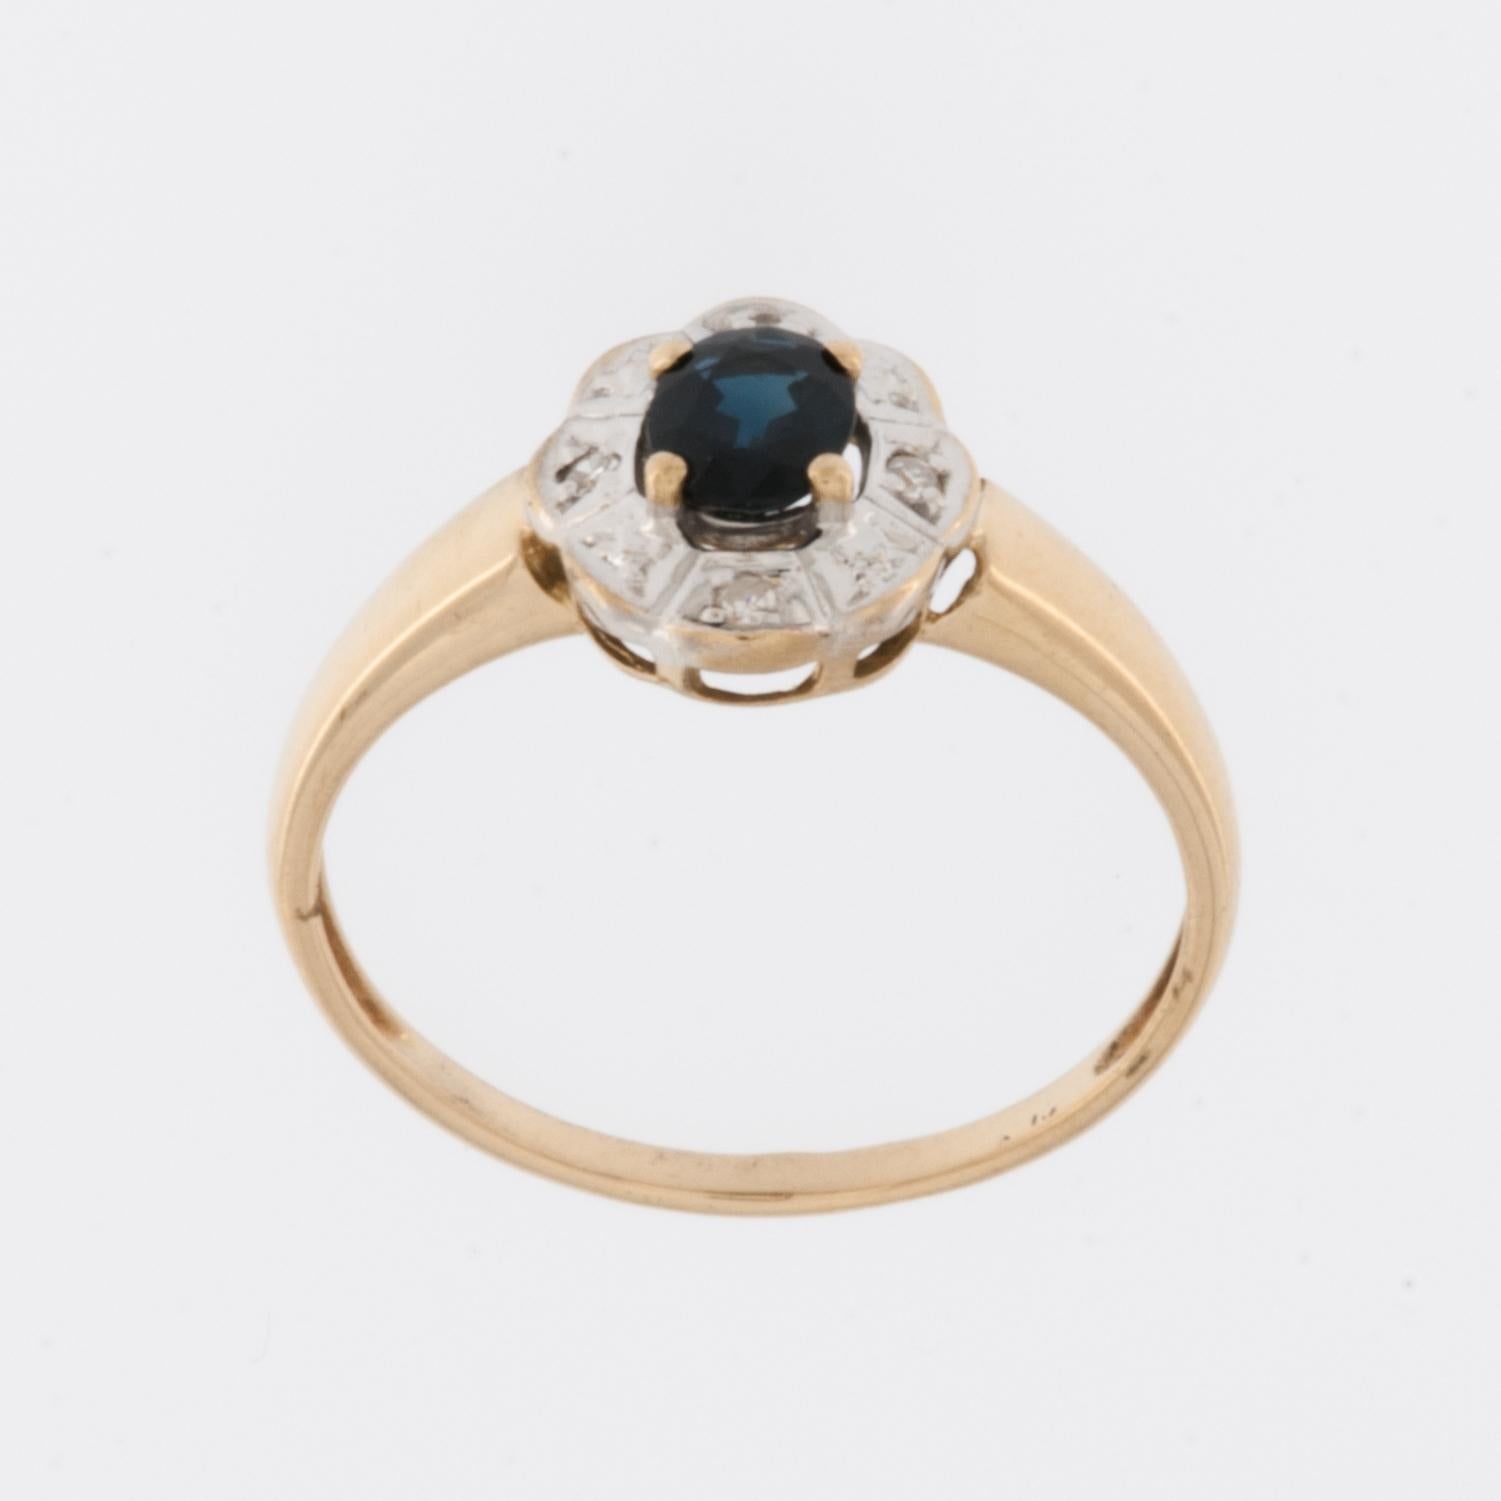 The Retro 18kt Gold Ring with Diamonds and Sapphire is a stunning piece of jewelry that combines classic design elements with the allure of precious gemstones. 

Crafted from high-quality 18-karat yellow and white gold, the ring boasts a luxurious